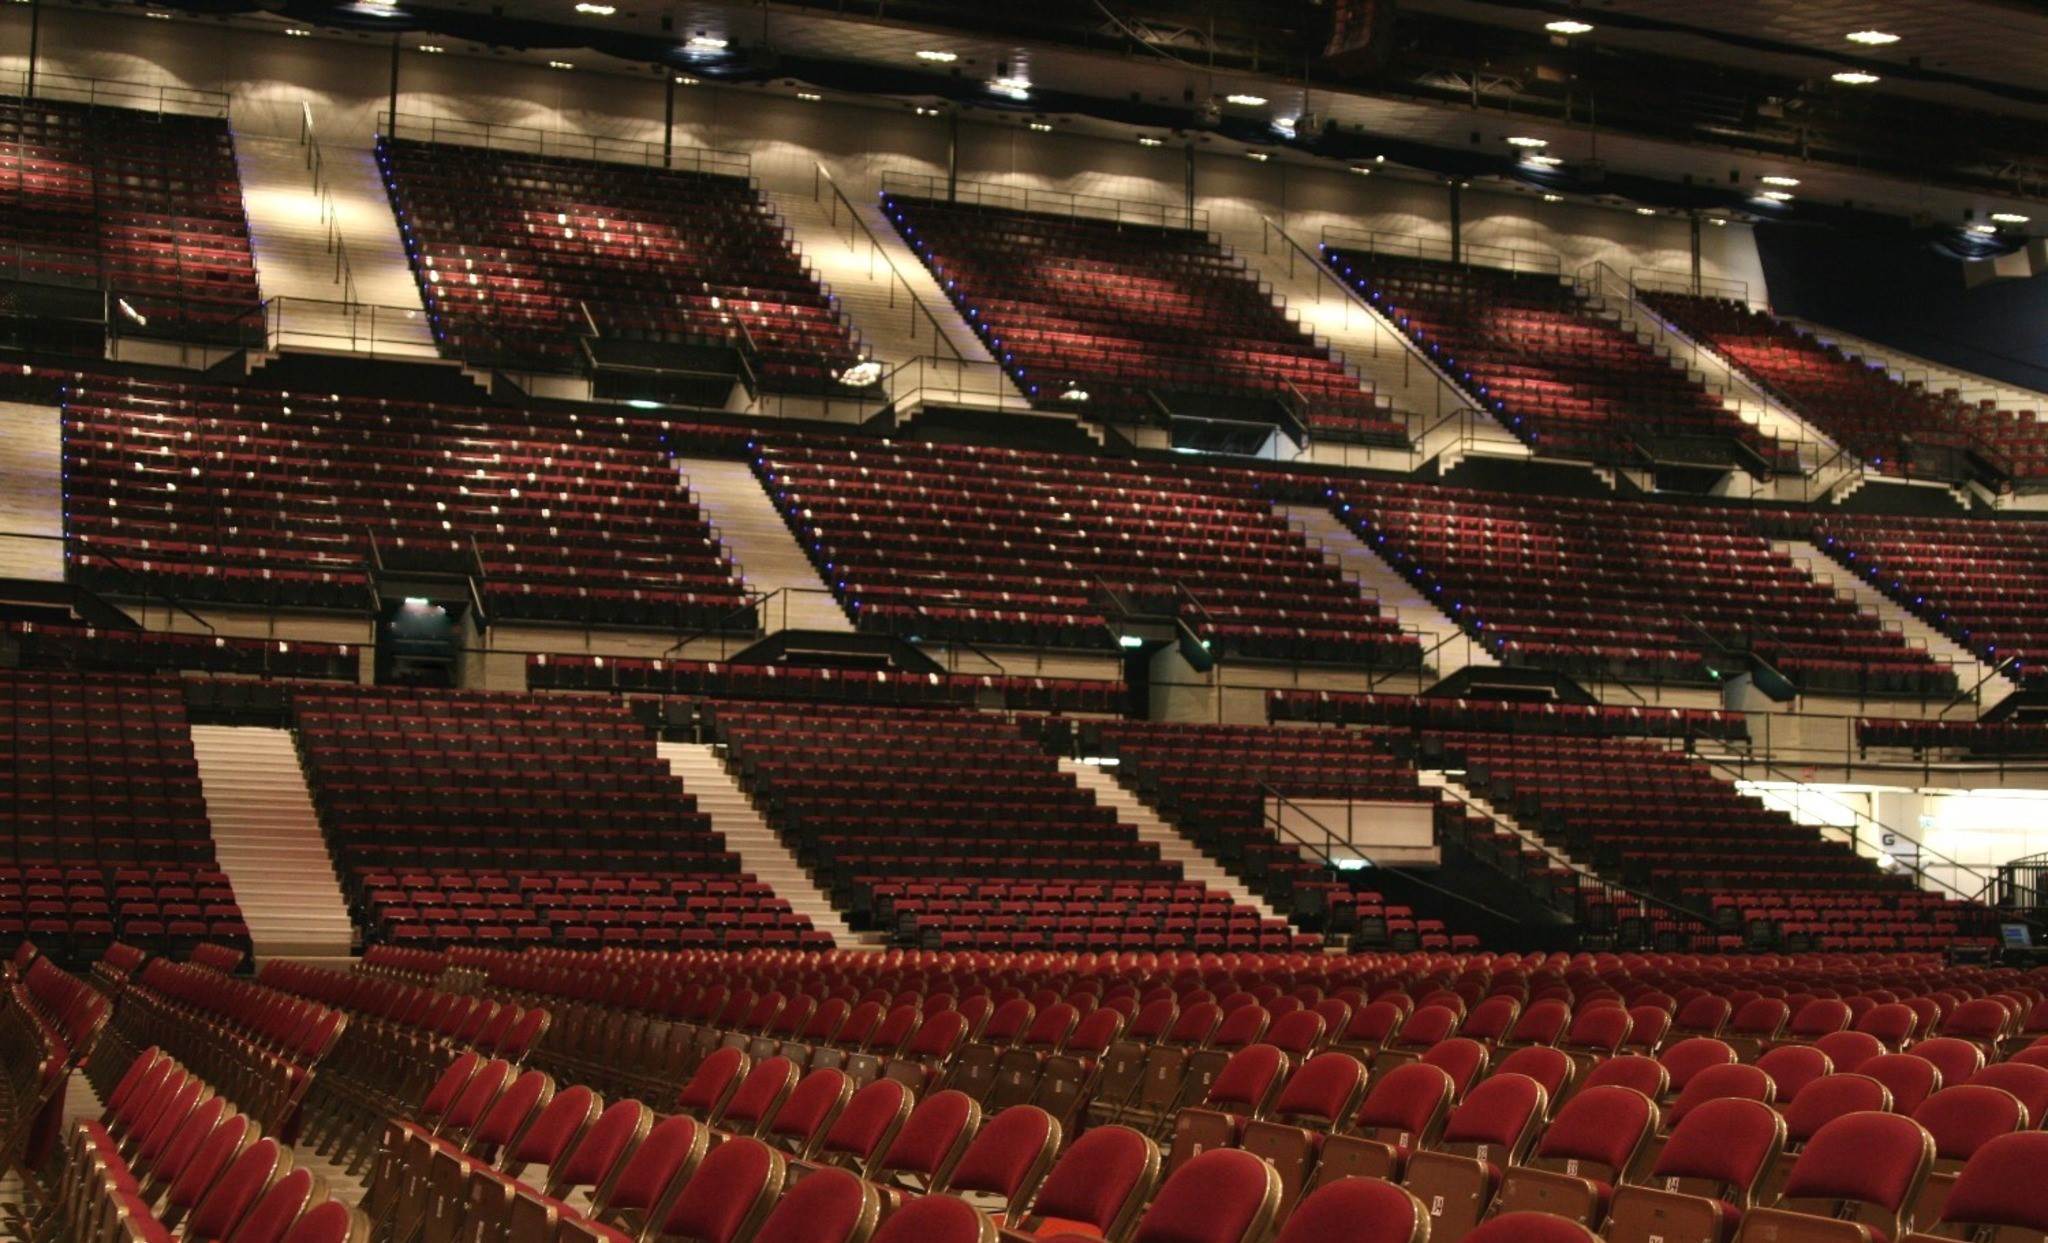 15-astounding-facts-about-wiener-stadthalle-d